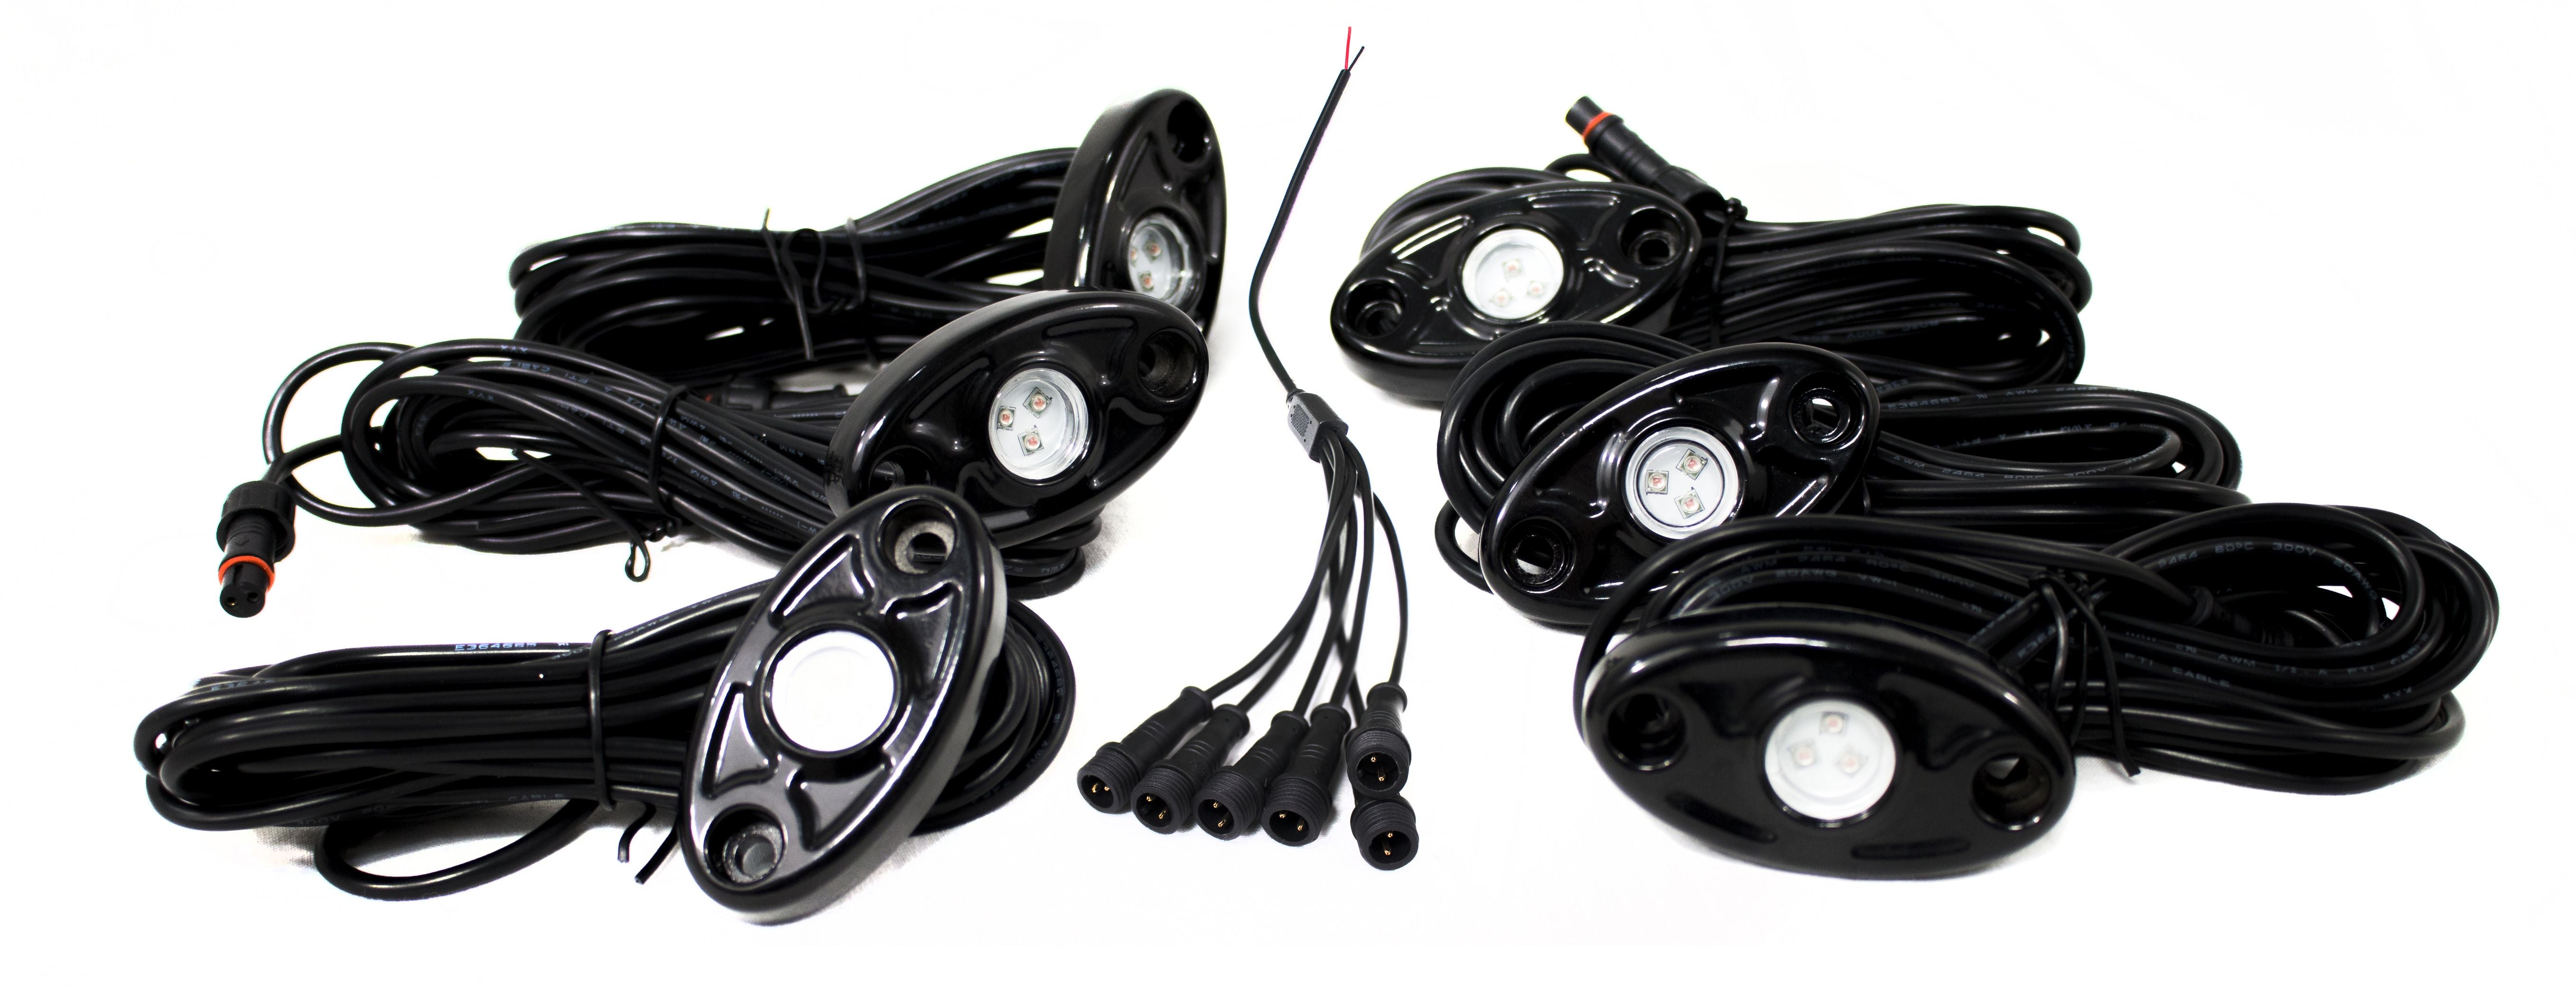 Race Sport 6 LED Glow Pod Kit with Brain Box IP68 12V with All Hardware Red RSLD6KITR